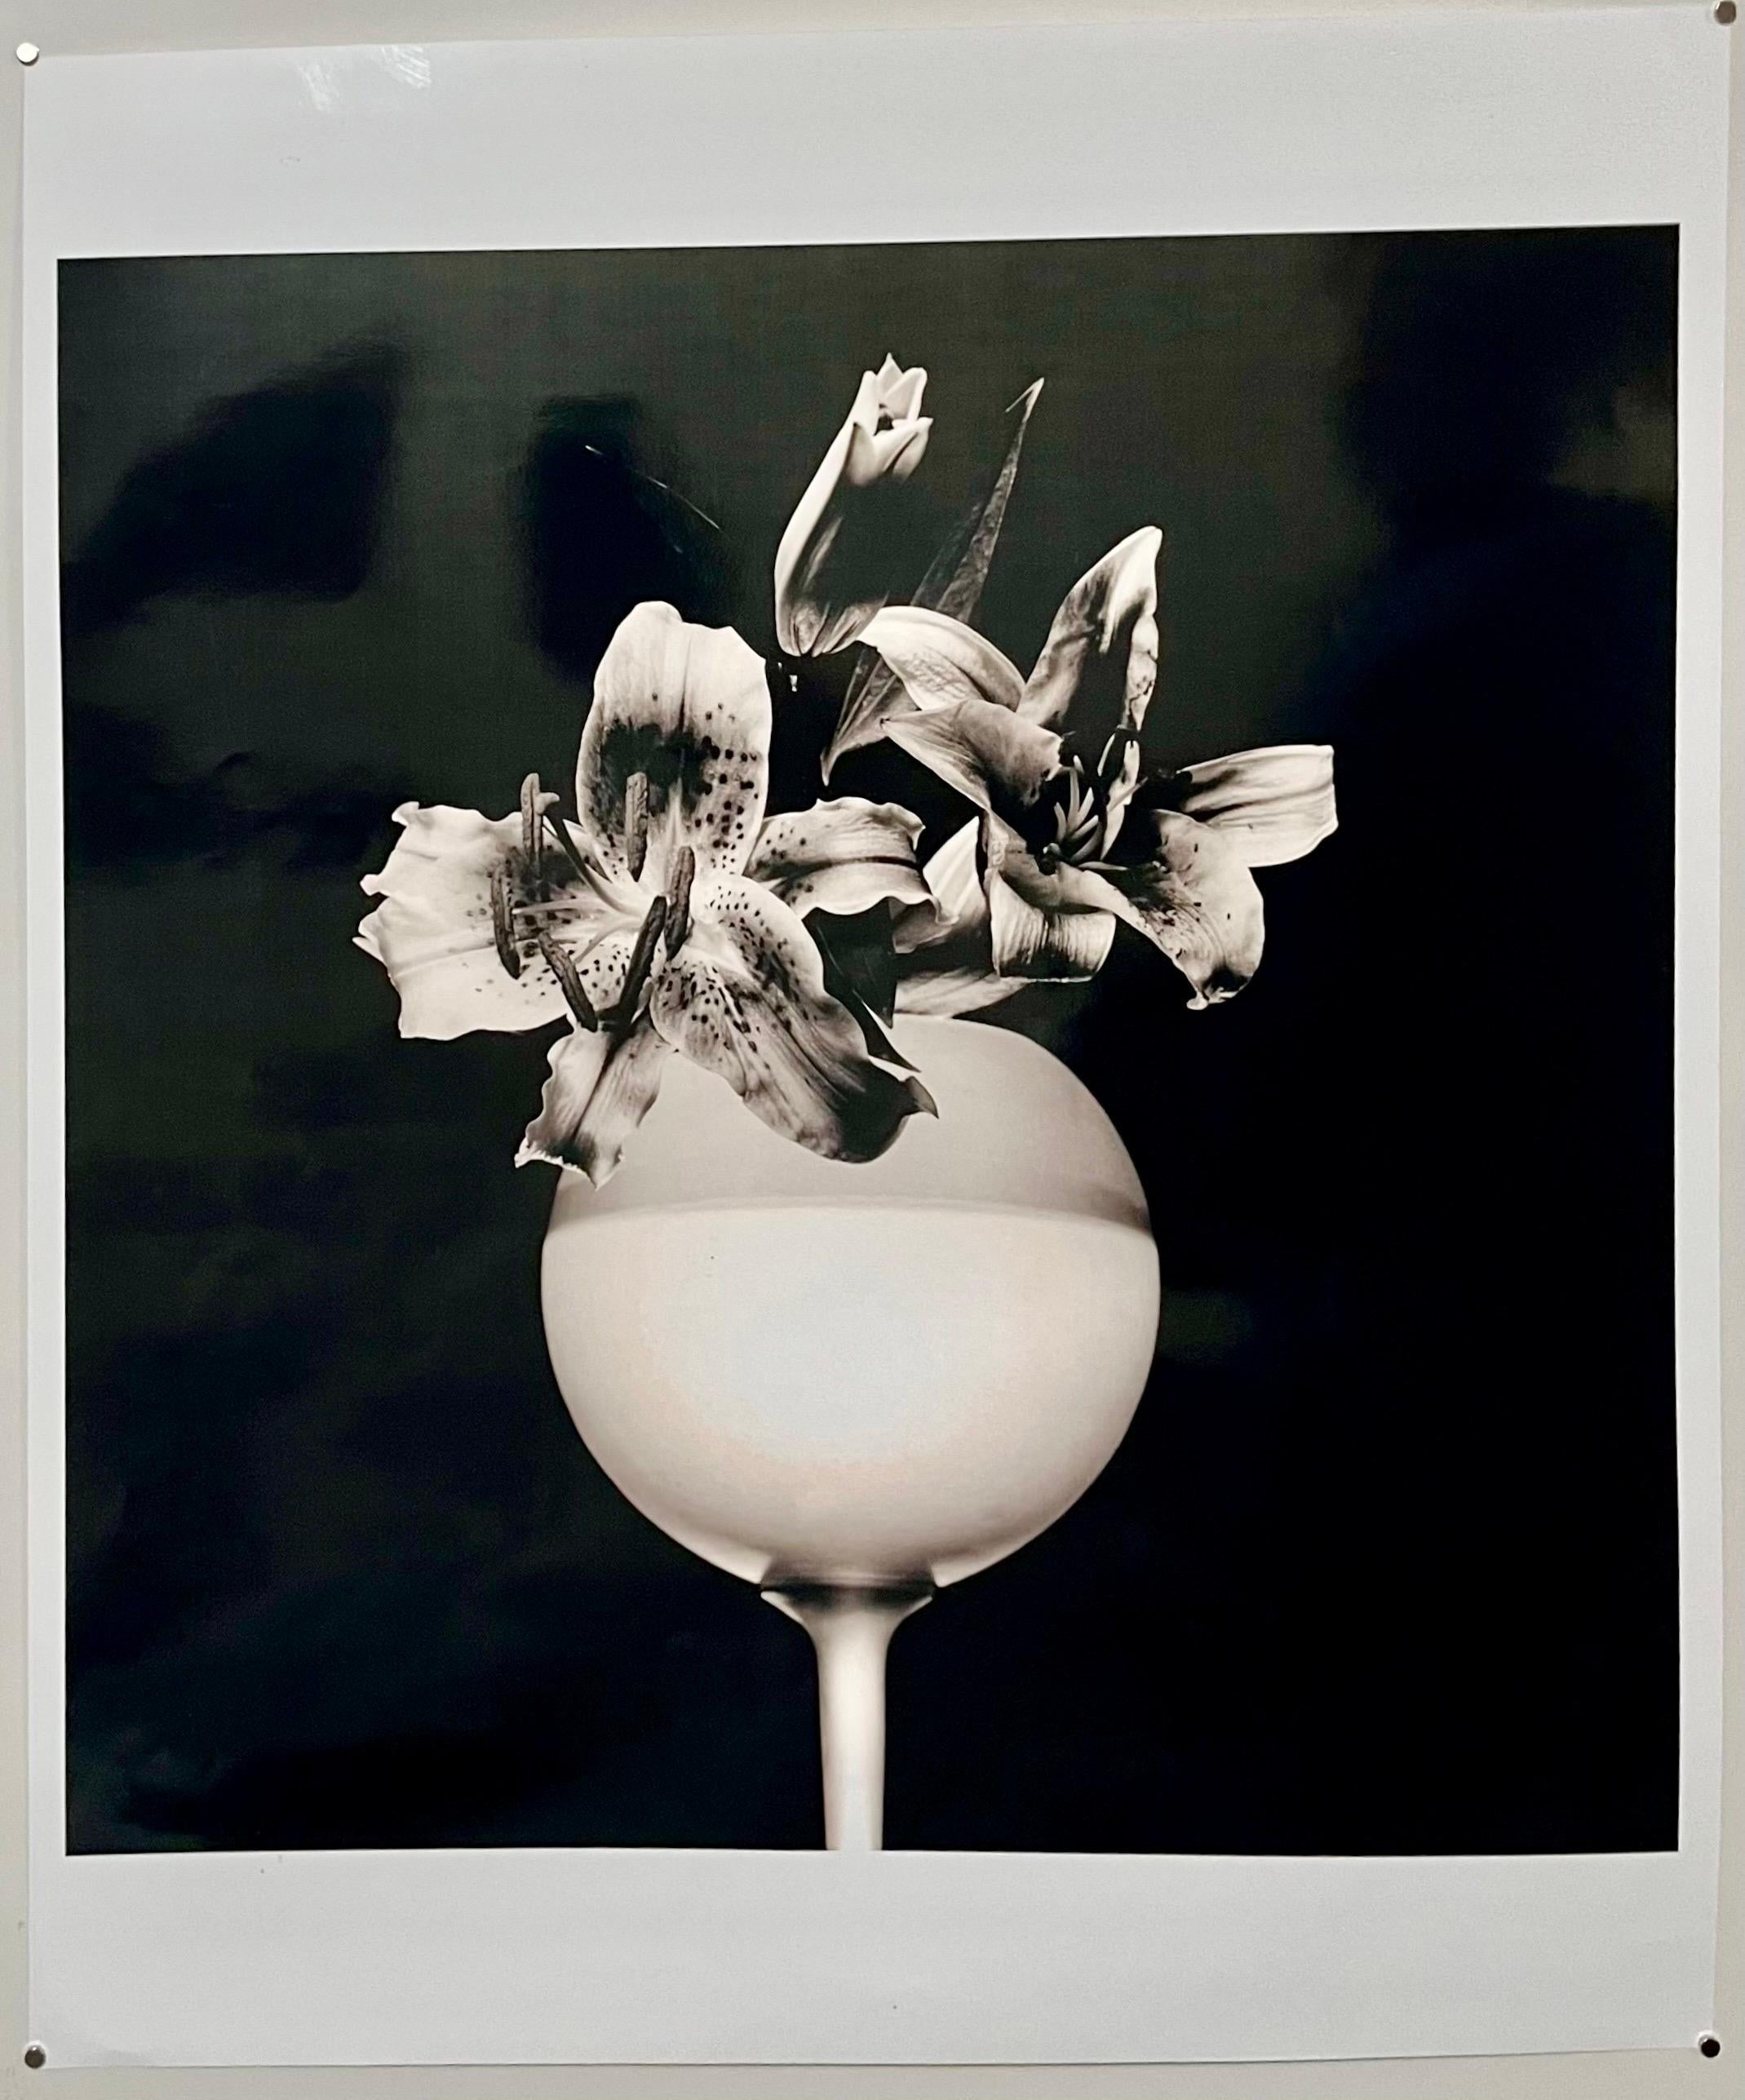 ROBERT MAPPLETHORPE, 1946-1989
'TIGER LILY', 1987

Silver gelatin print
bearing the photographer's copyright stamp on the reverse 
this is not hand signed and there is no edition number. this might be a proof print.
Image 48.7 x 48.7 cm 19⅛x